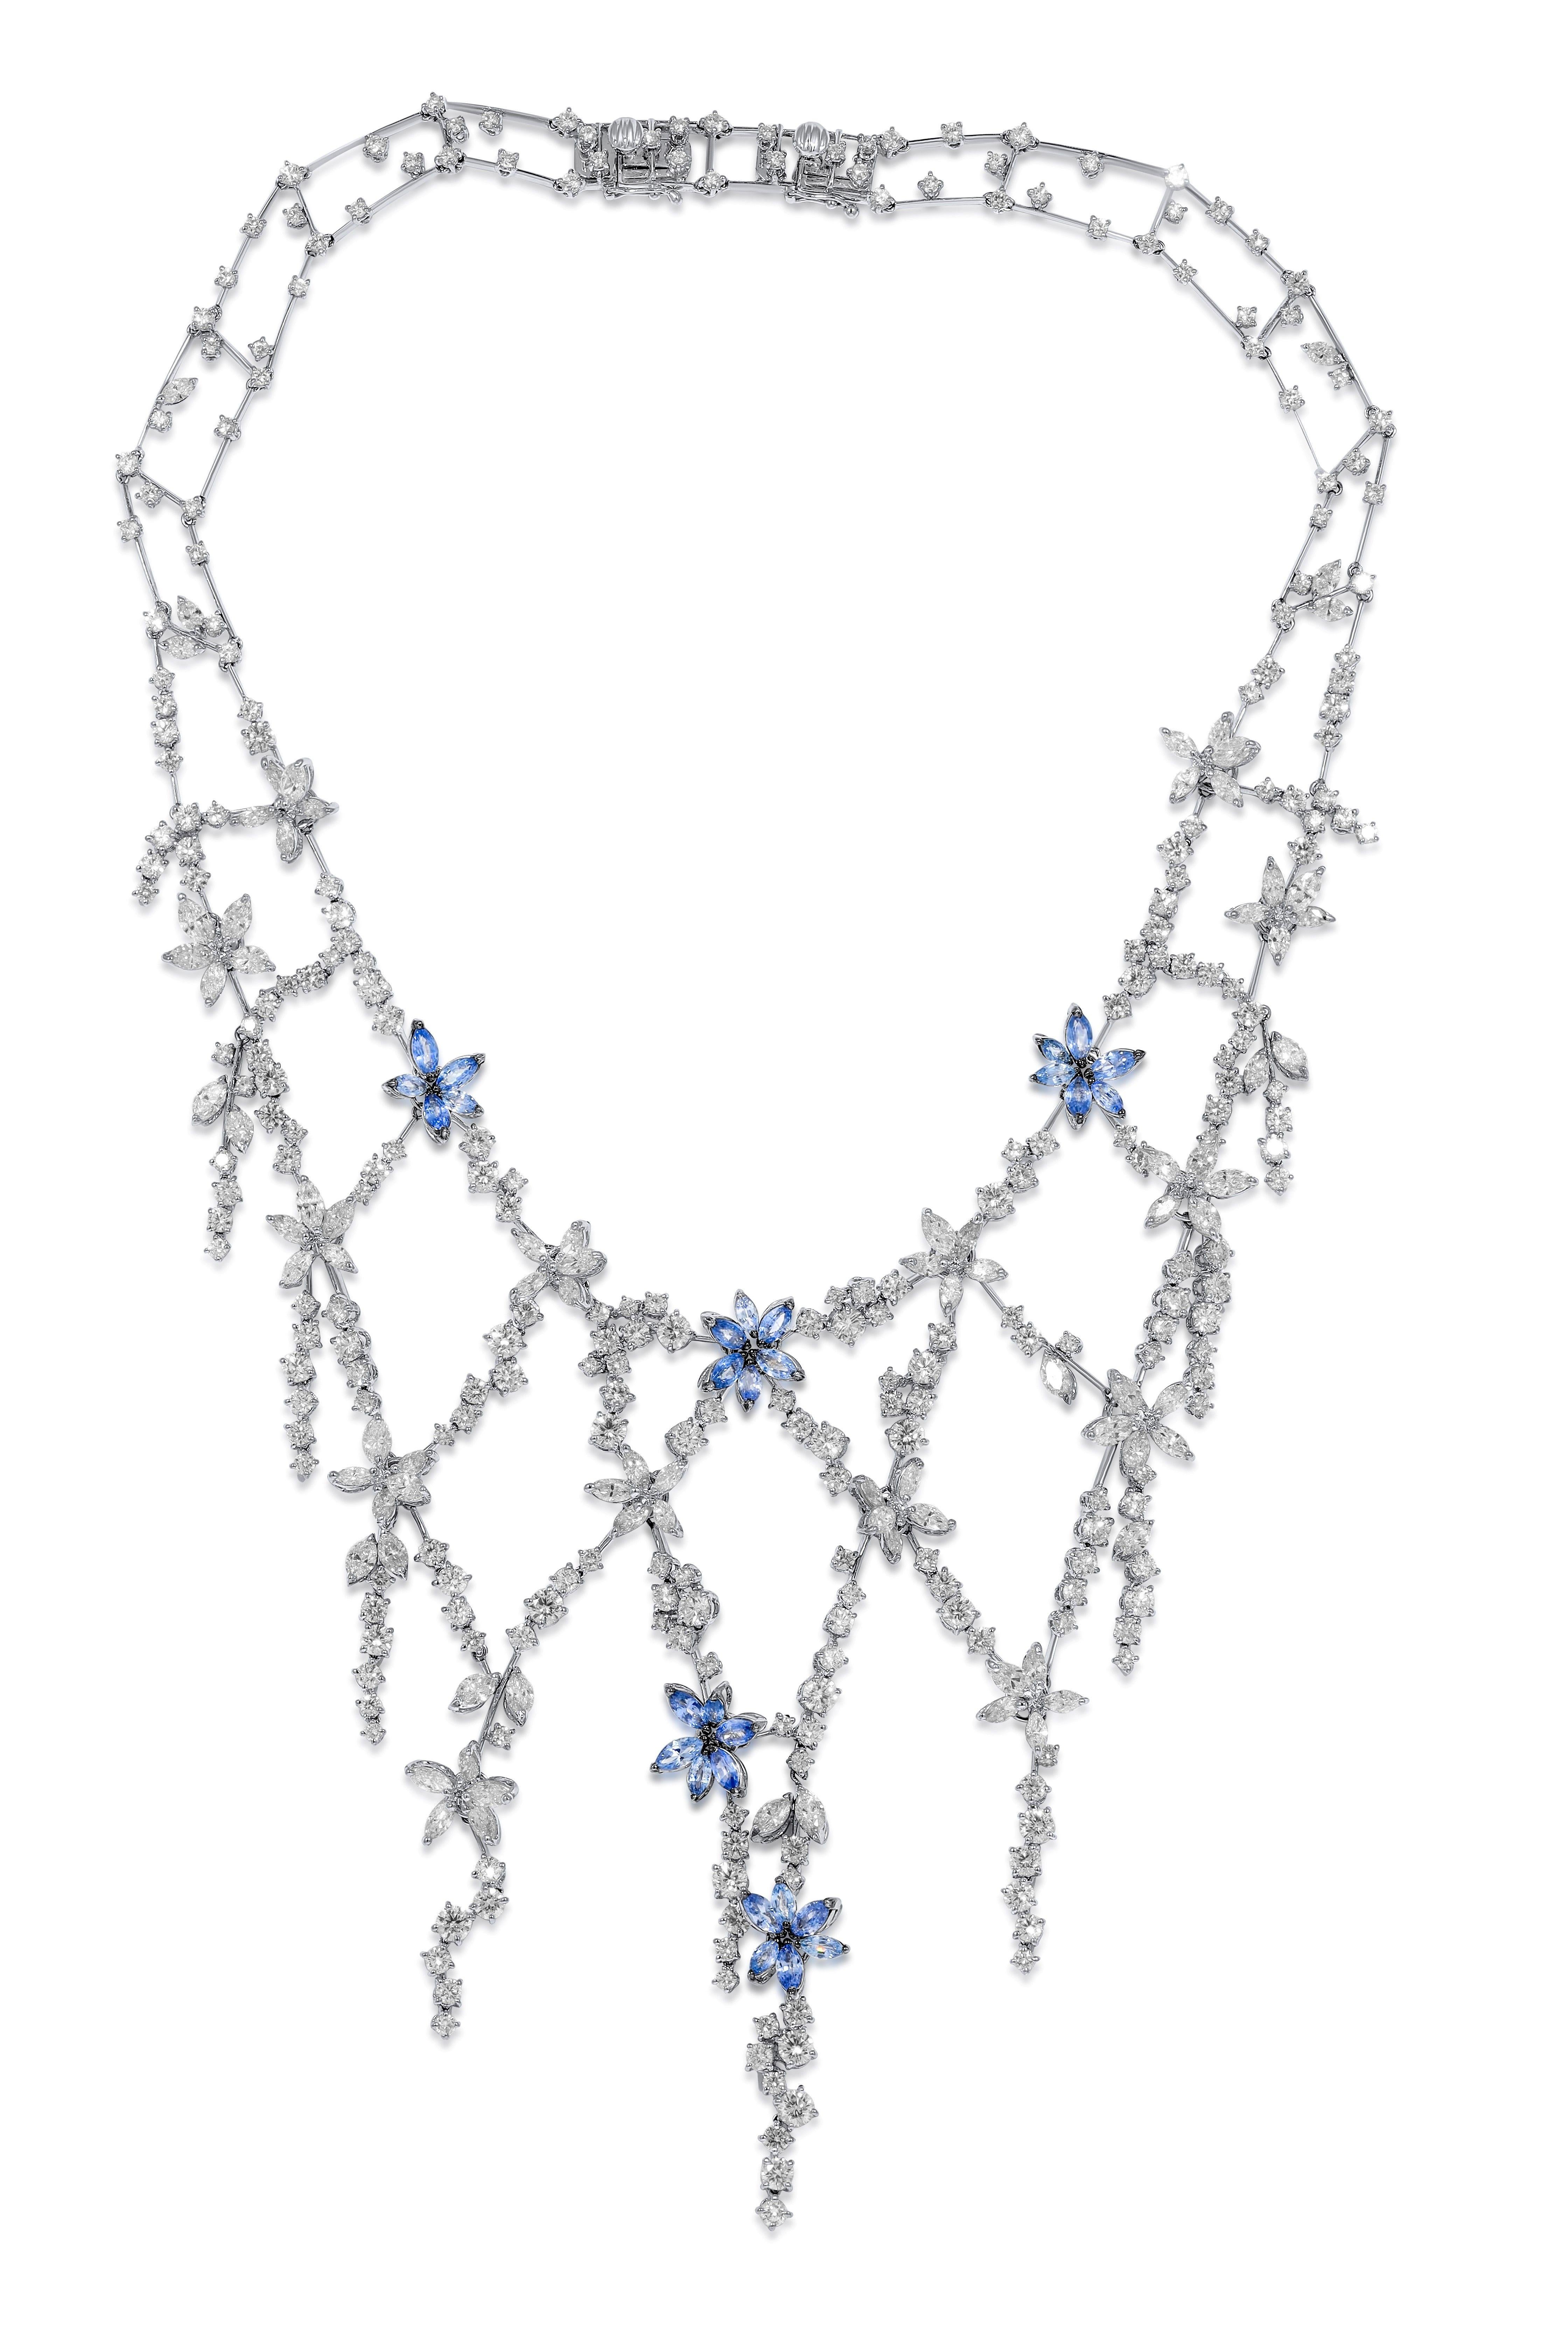 18kt white gold hanging flowers sapphires and diamonds necklace, features 6.65 carats of marquise sapphires with 35.80 carats of round and marquise diamonds.